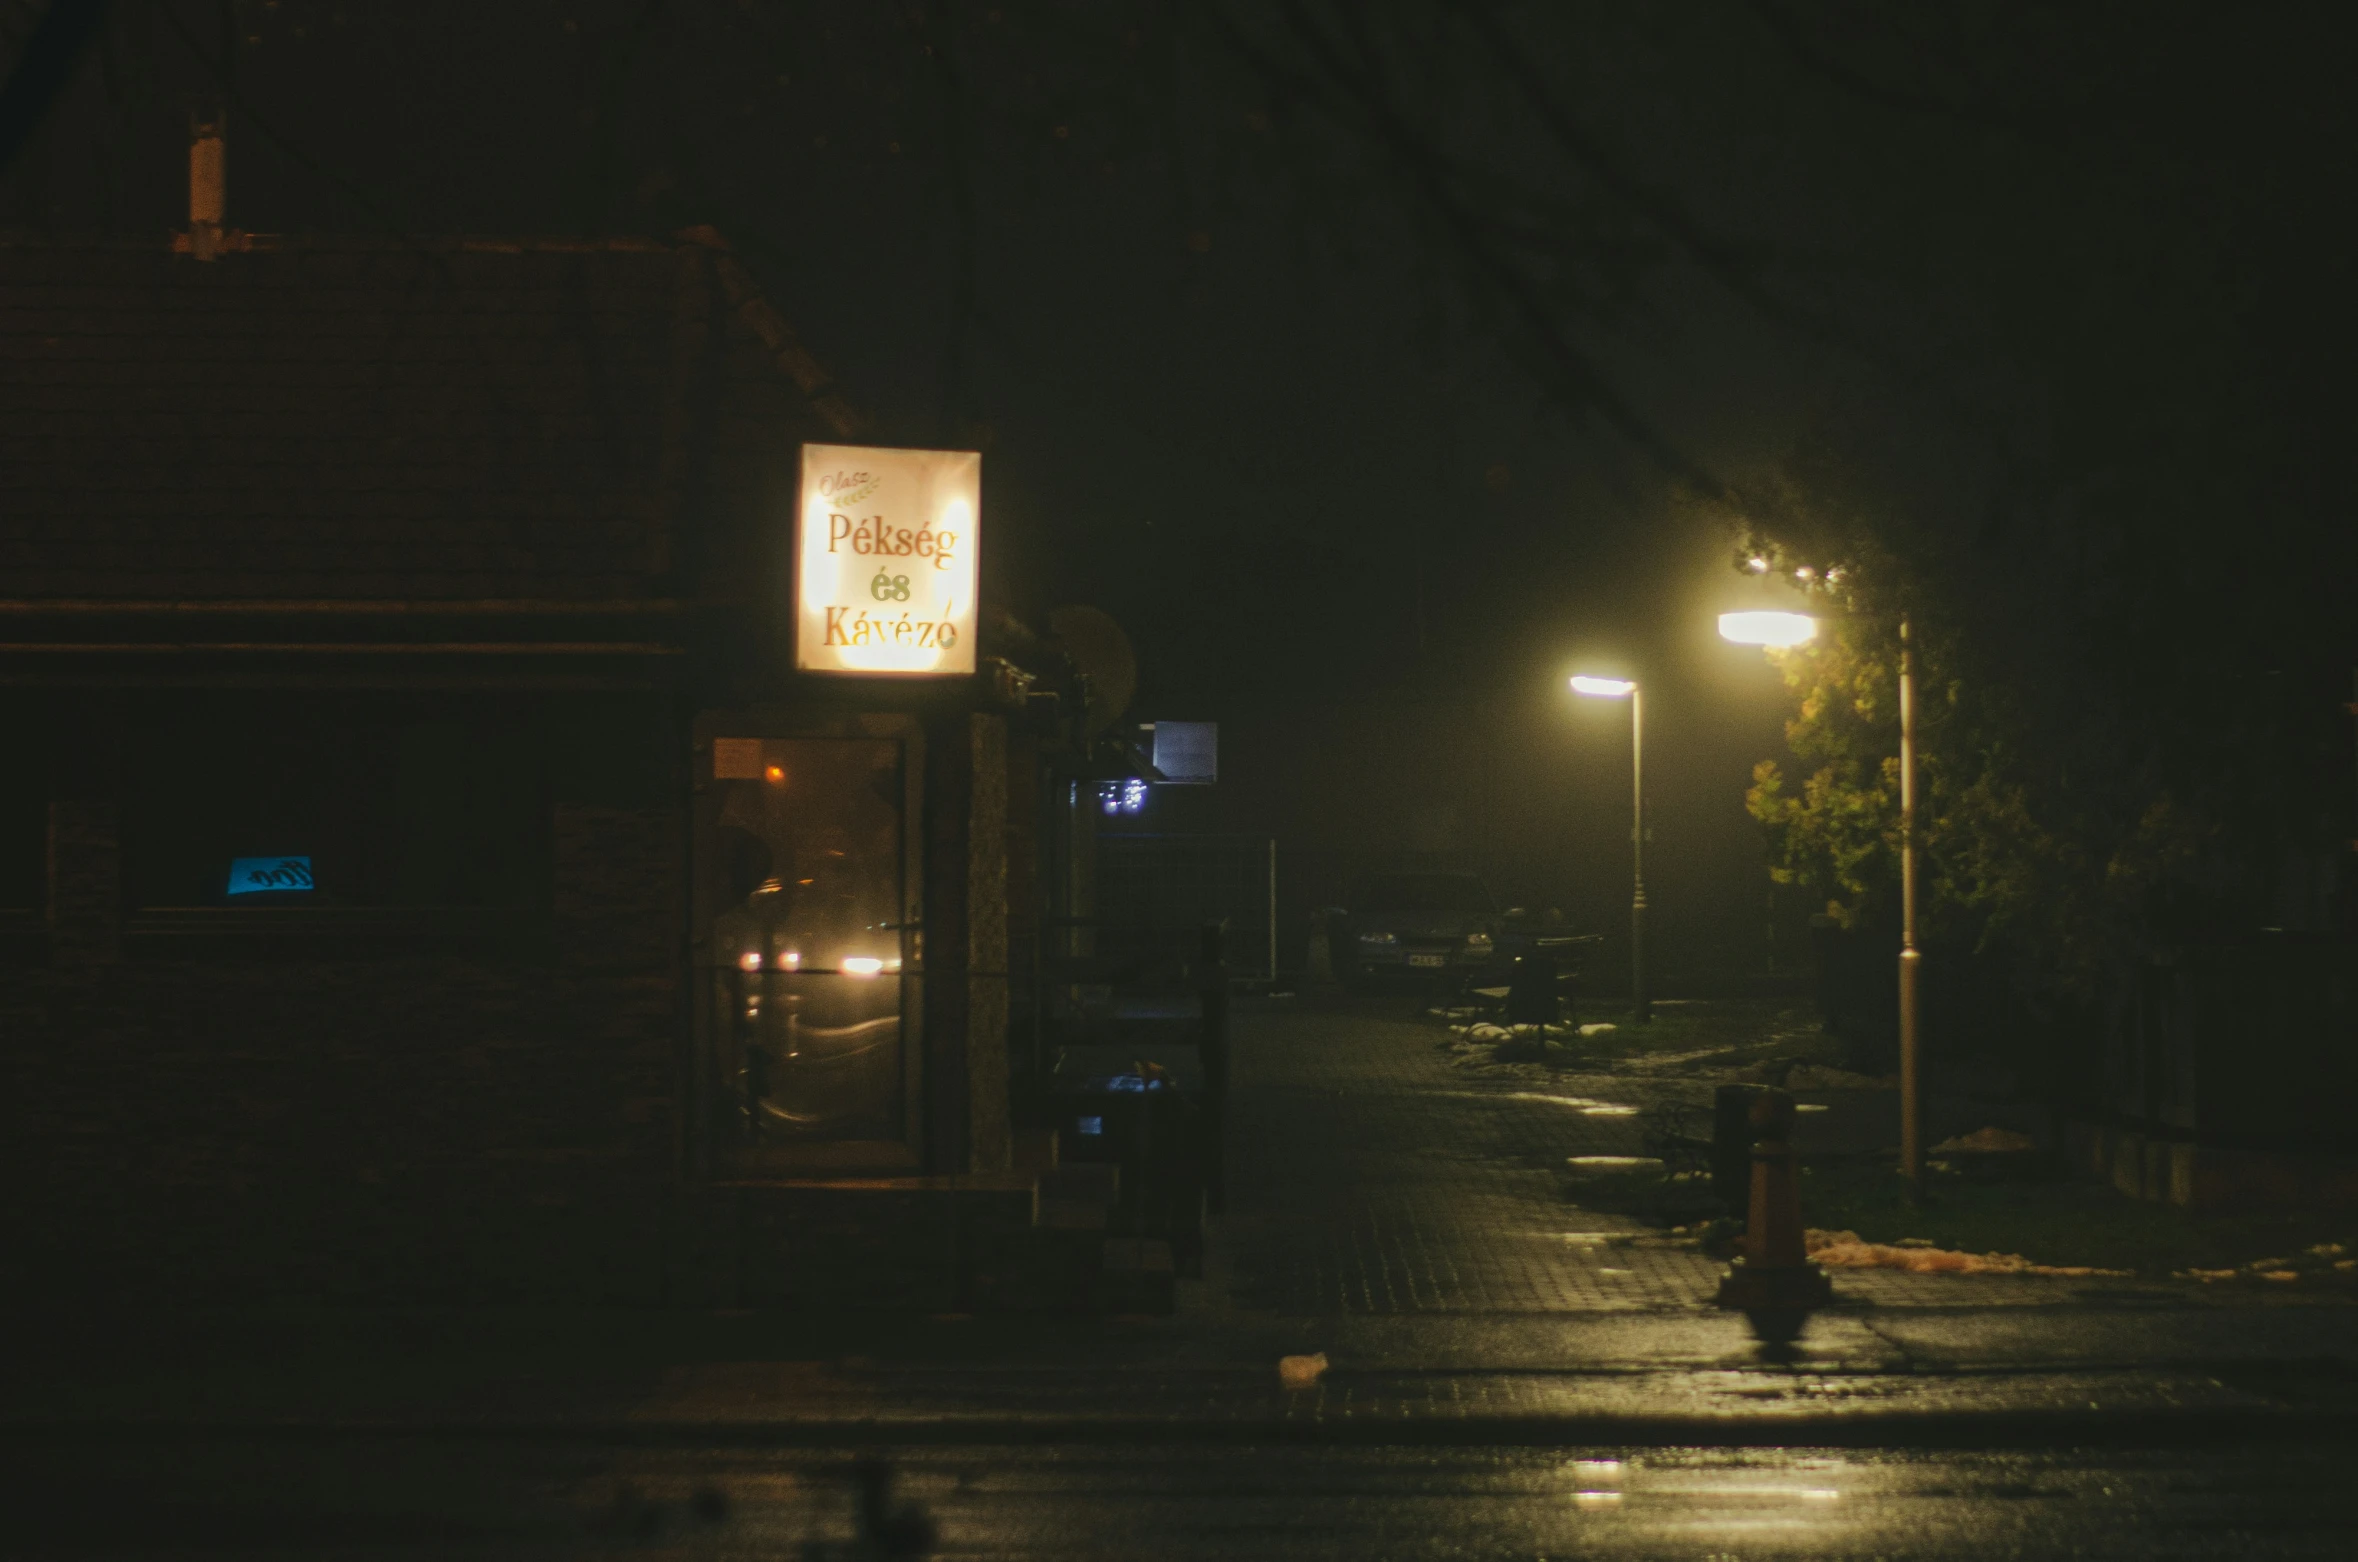 a dark street is seen at night, with a sign lit up